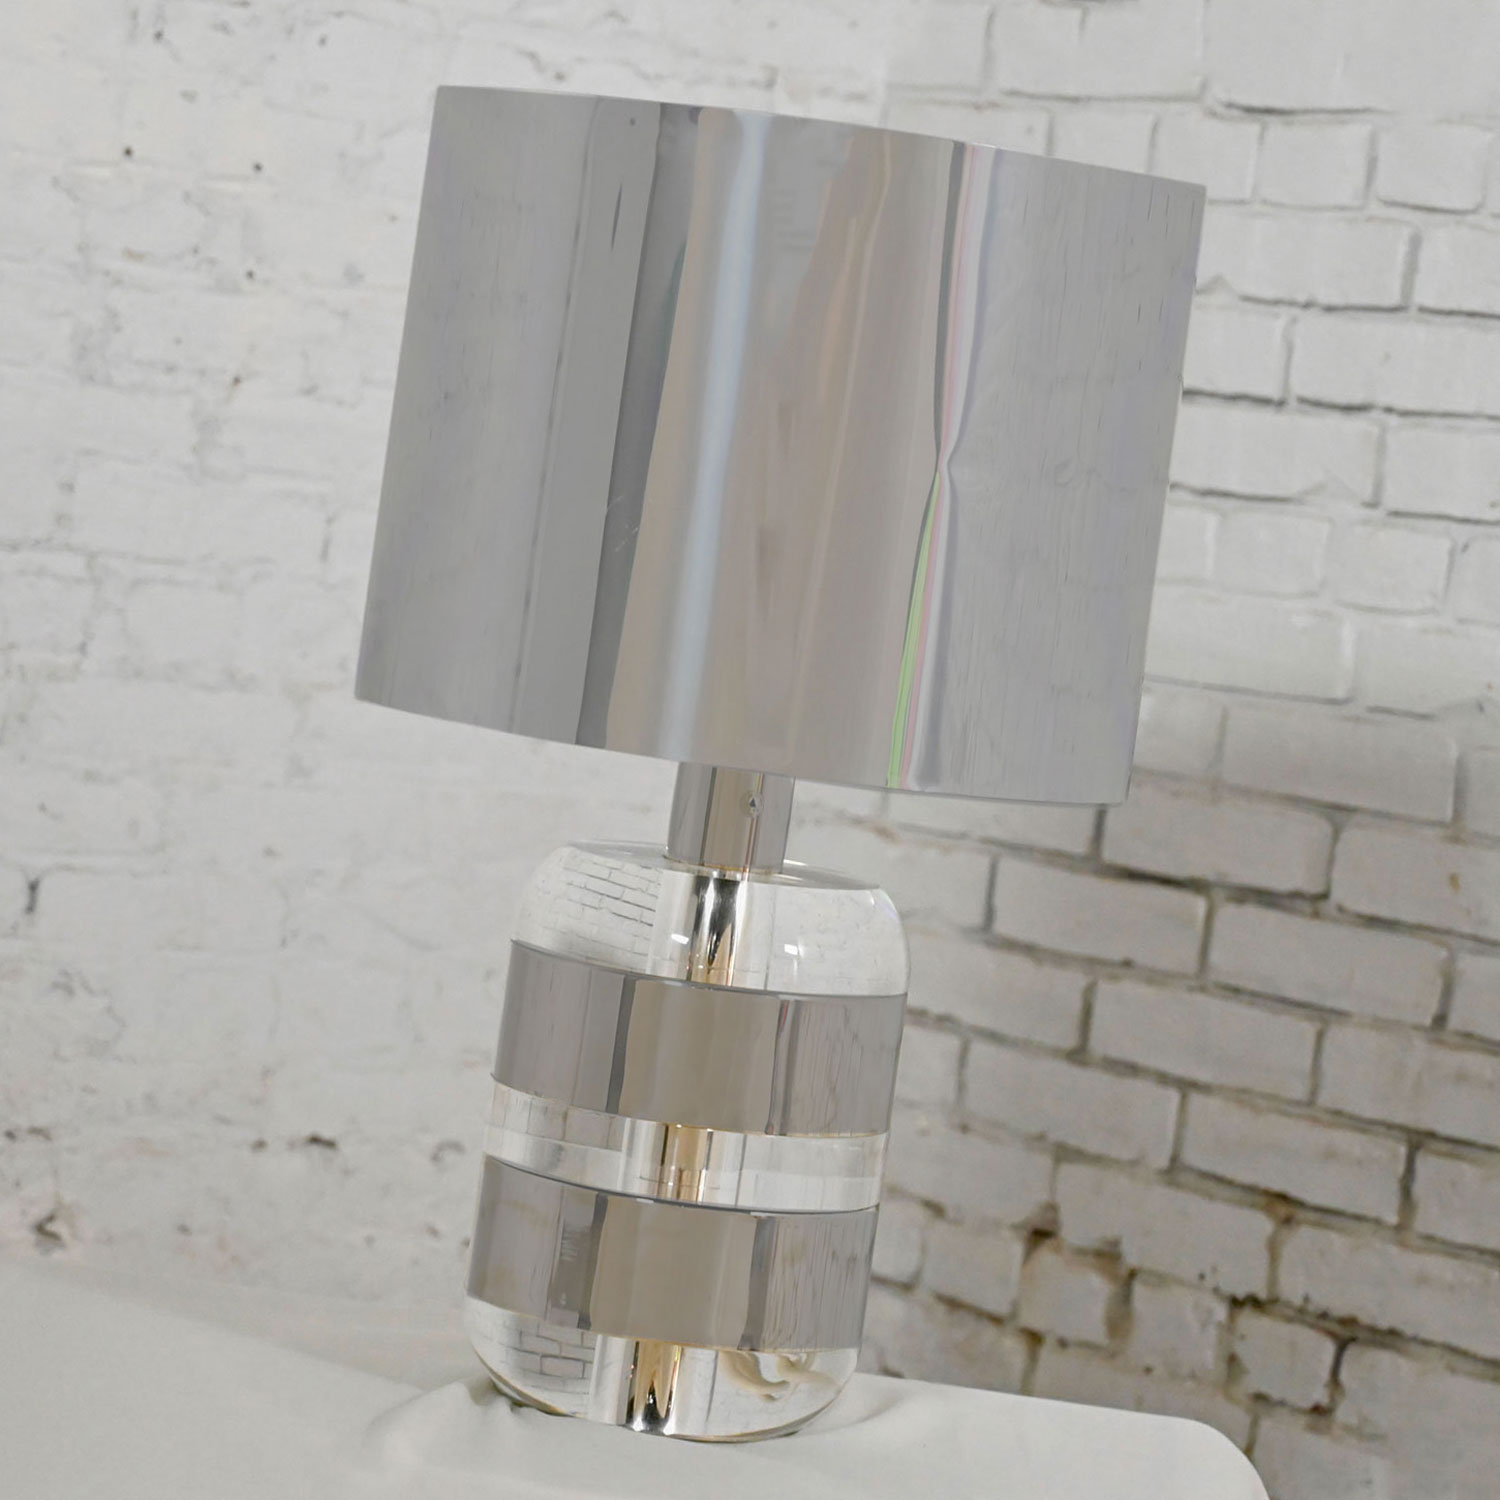 Vintage Italian Modern Lucite & Chrome Table Lamp Polished Aluminum Shade by Noel B.C. Italy